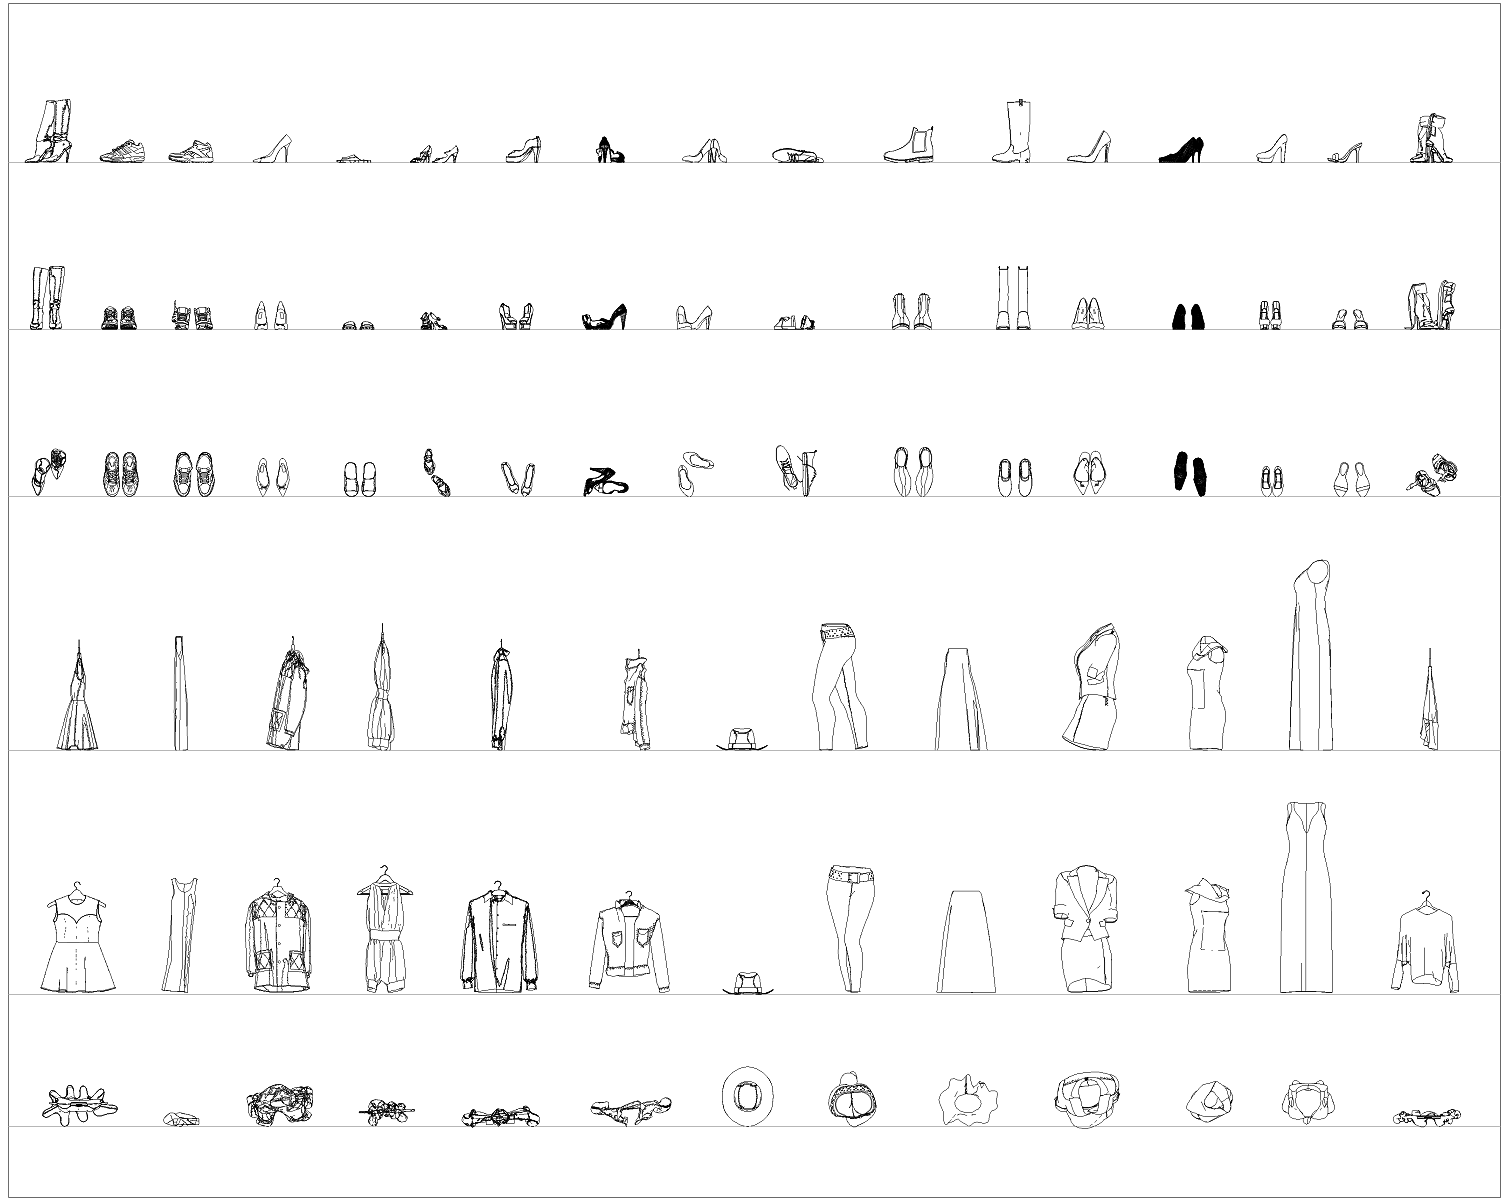 Clothes and shoes CAD collection dwg | Thousands of free AutoCAD drawings